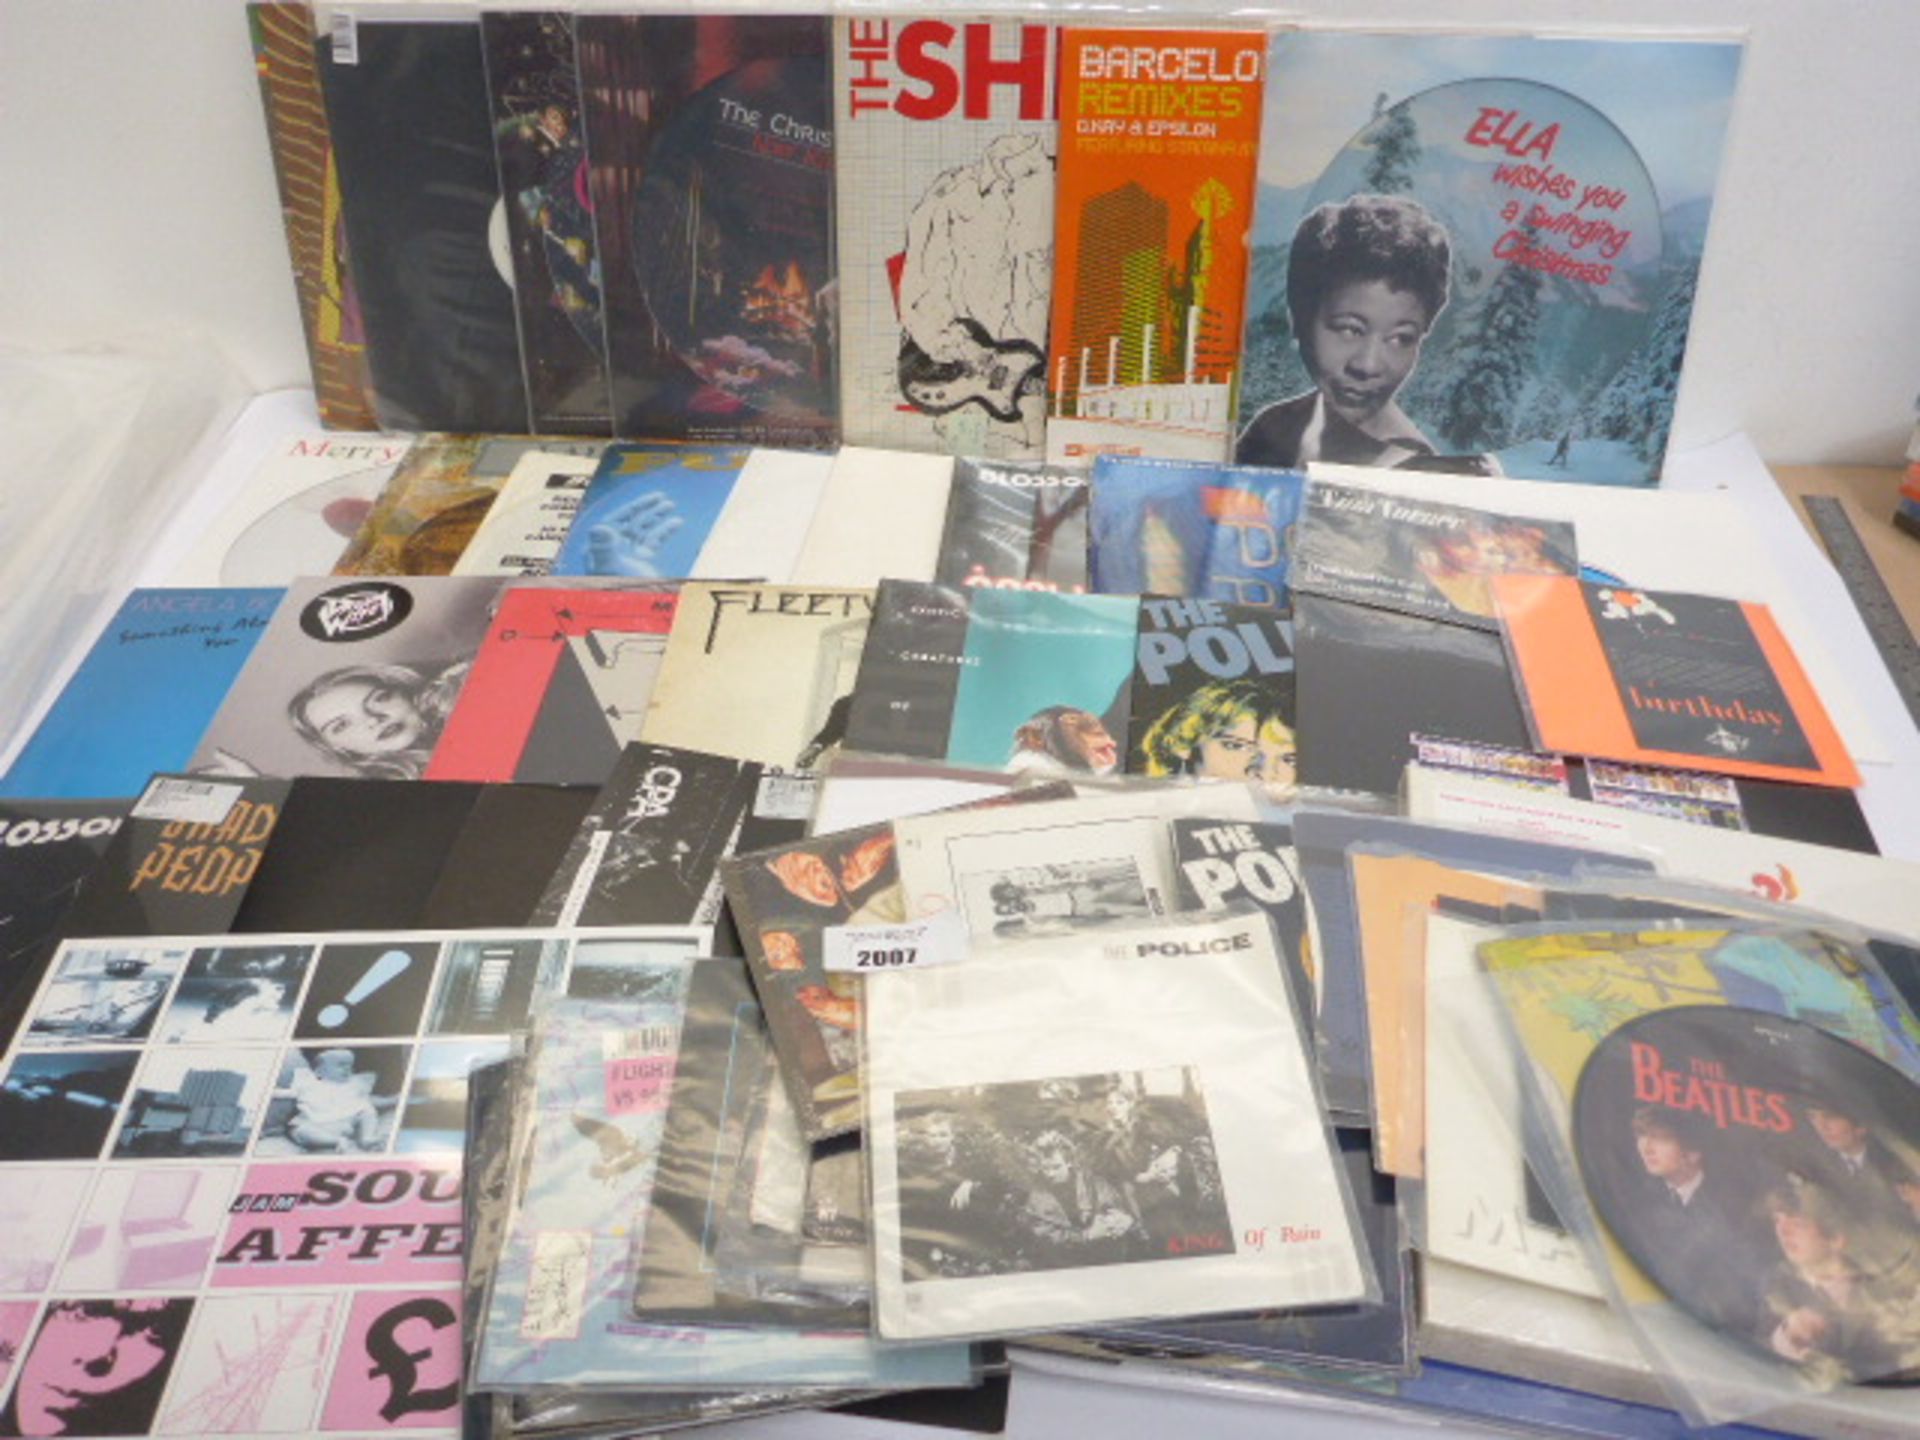 Selection of LP and 45 rpm records including Nat King Cole, Fleetwood Mac, Bing Crosby, Led